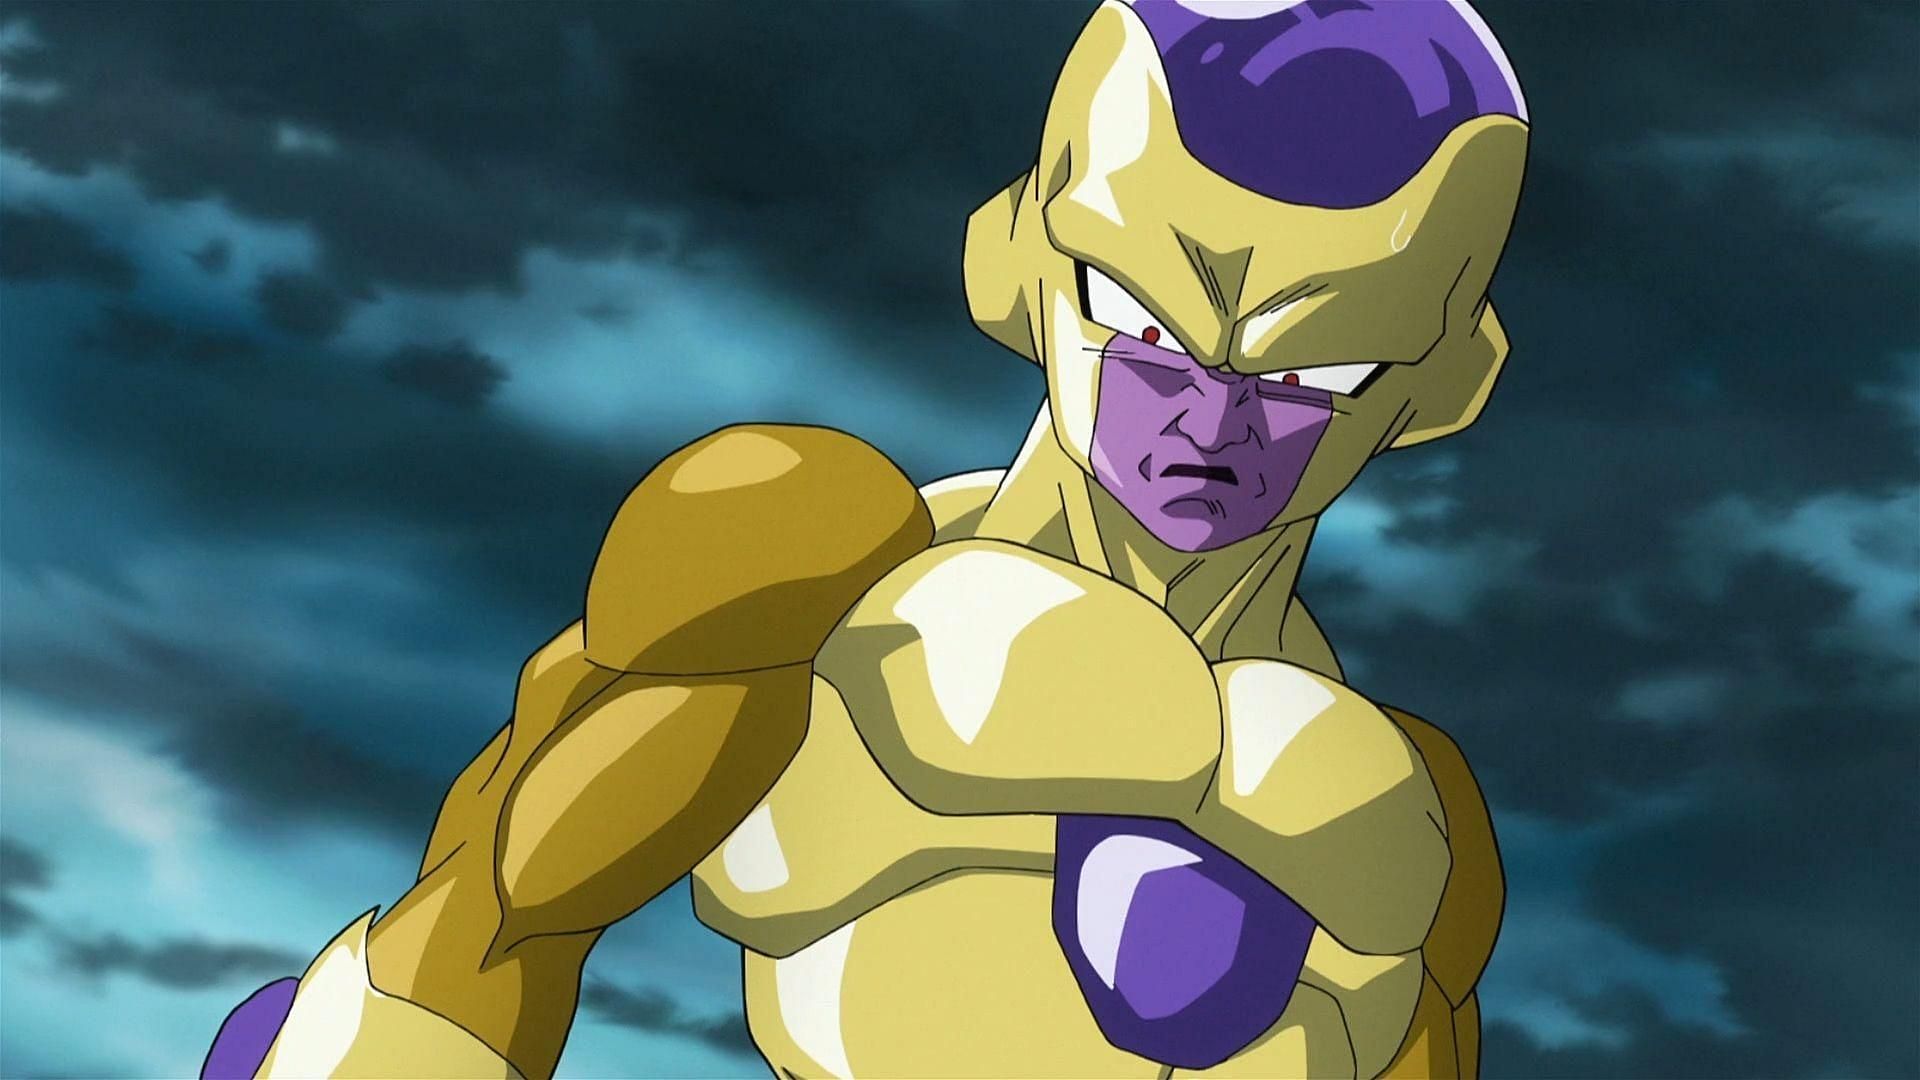 Frieza in his Golden Form (Image via Toei Animation)